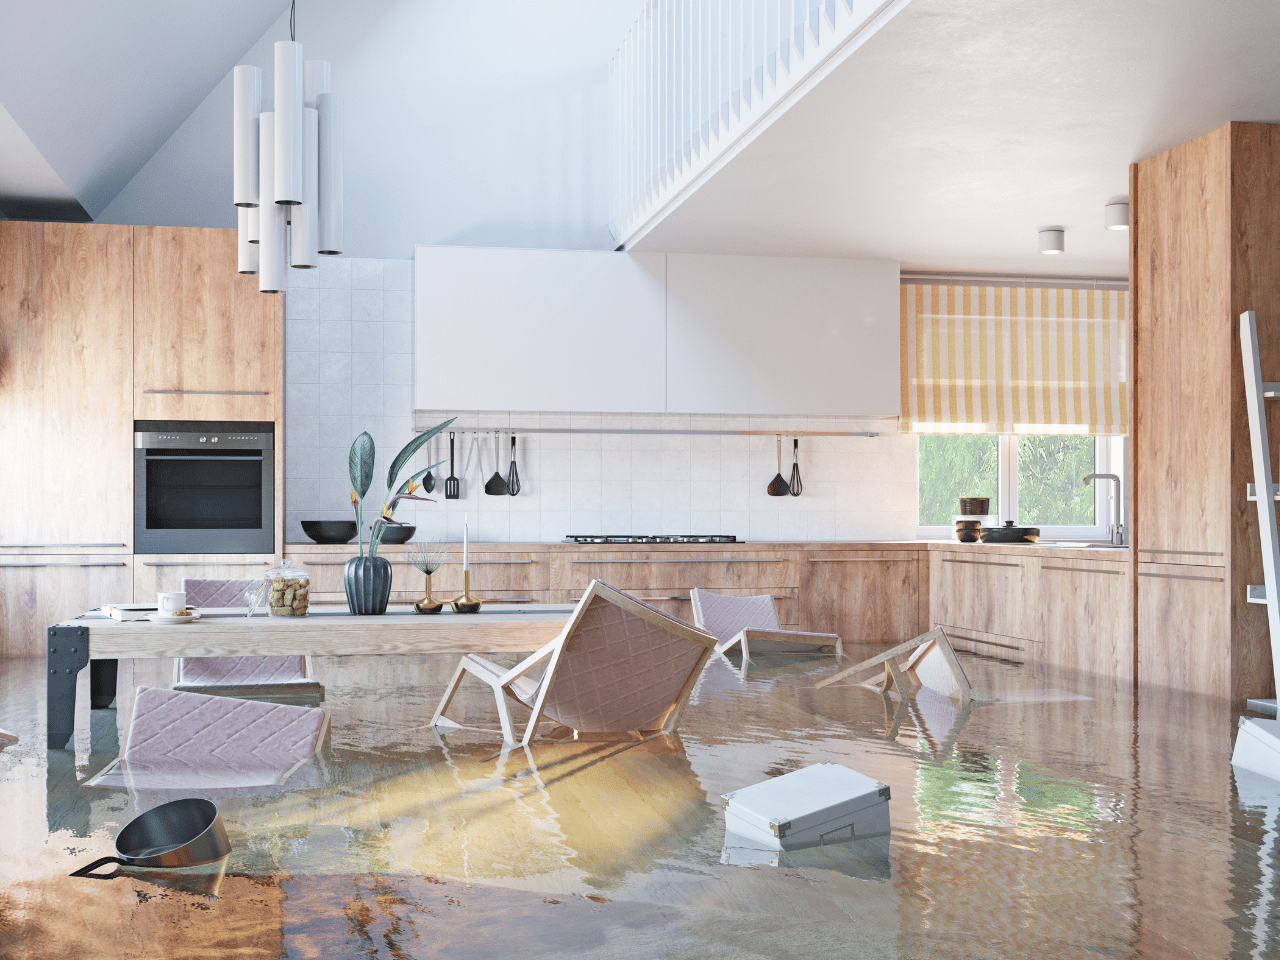 Restoring Your Home After a Flood: A Step-by-Step Water Damage Restoration Process